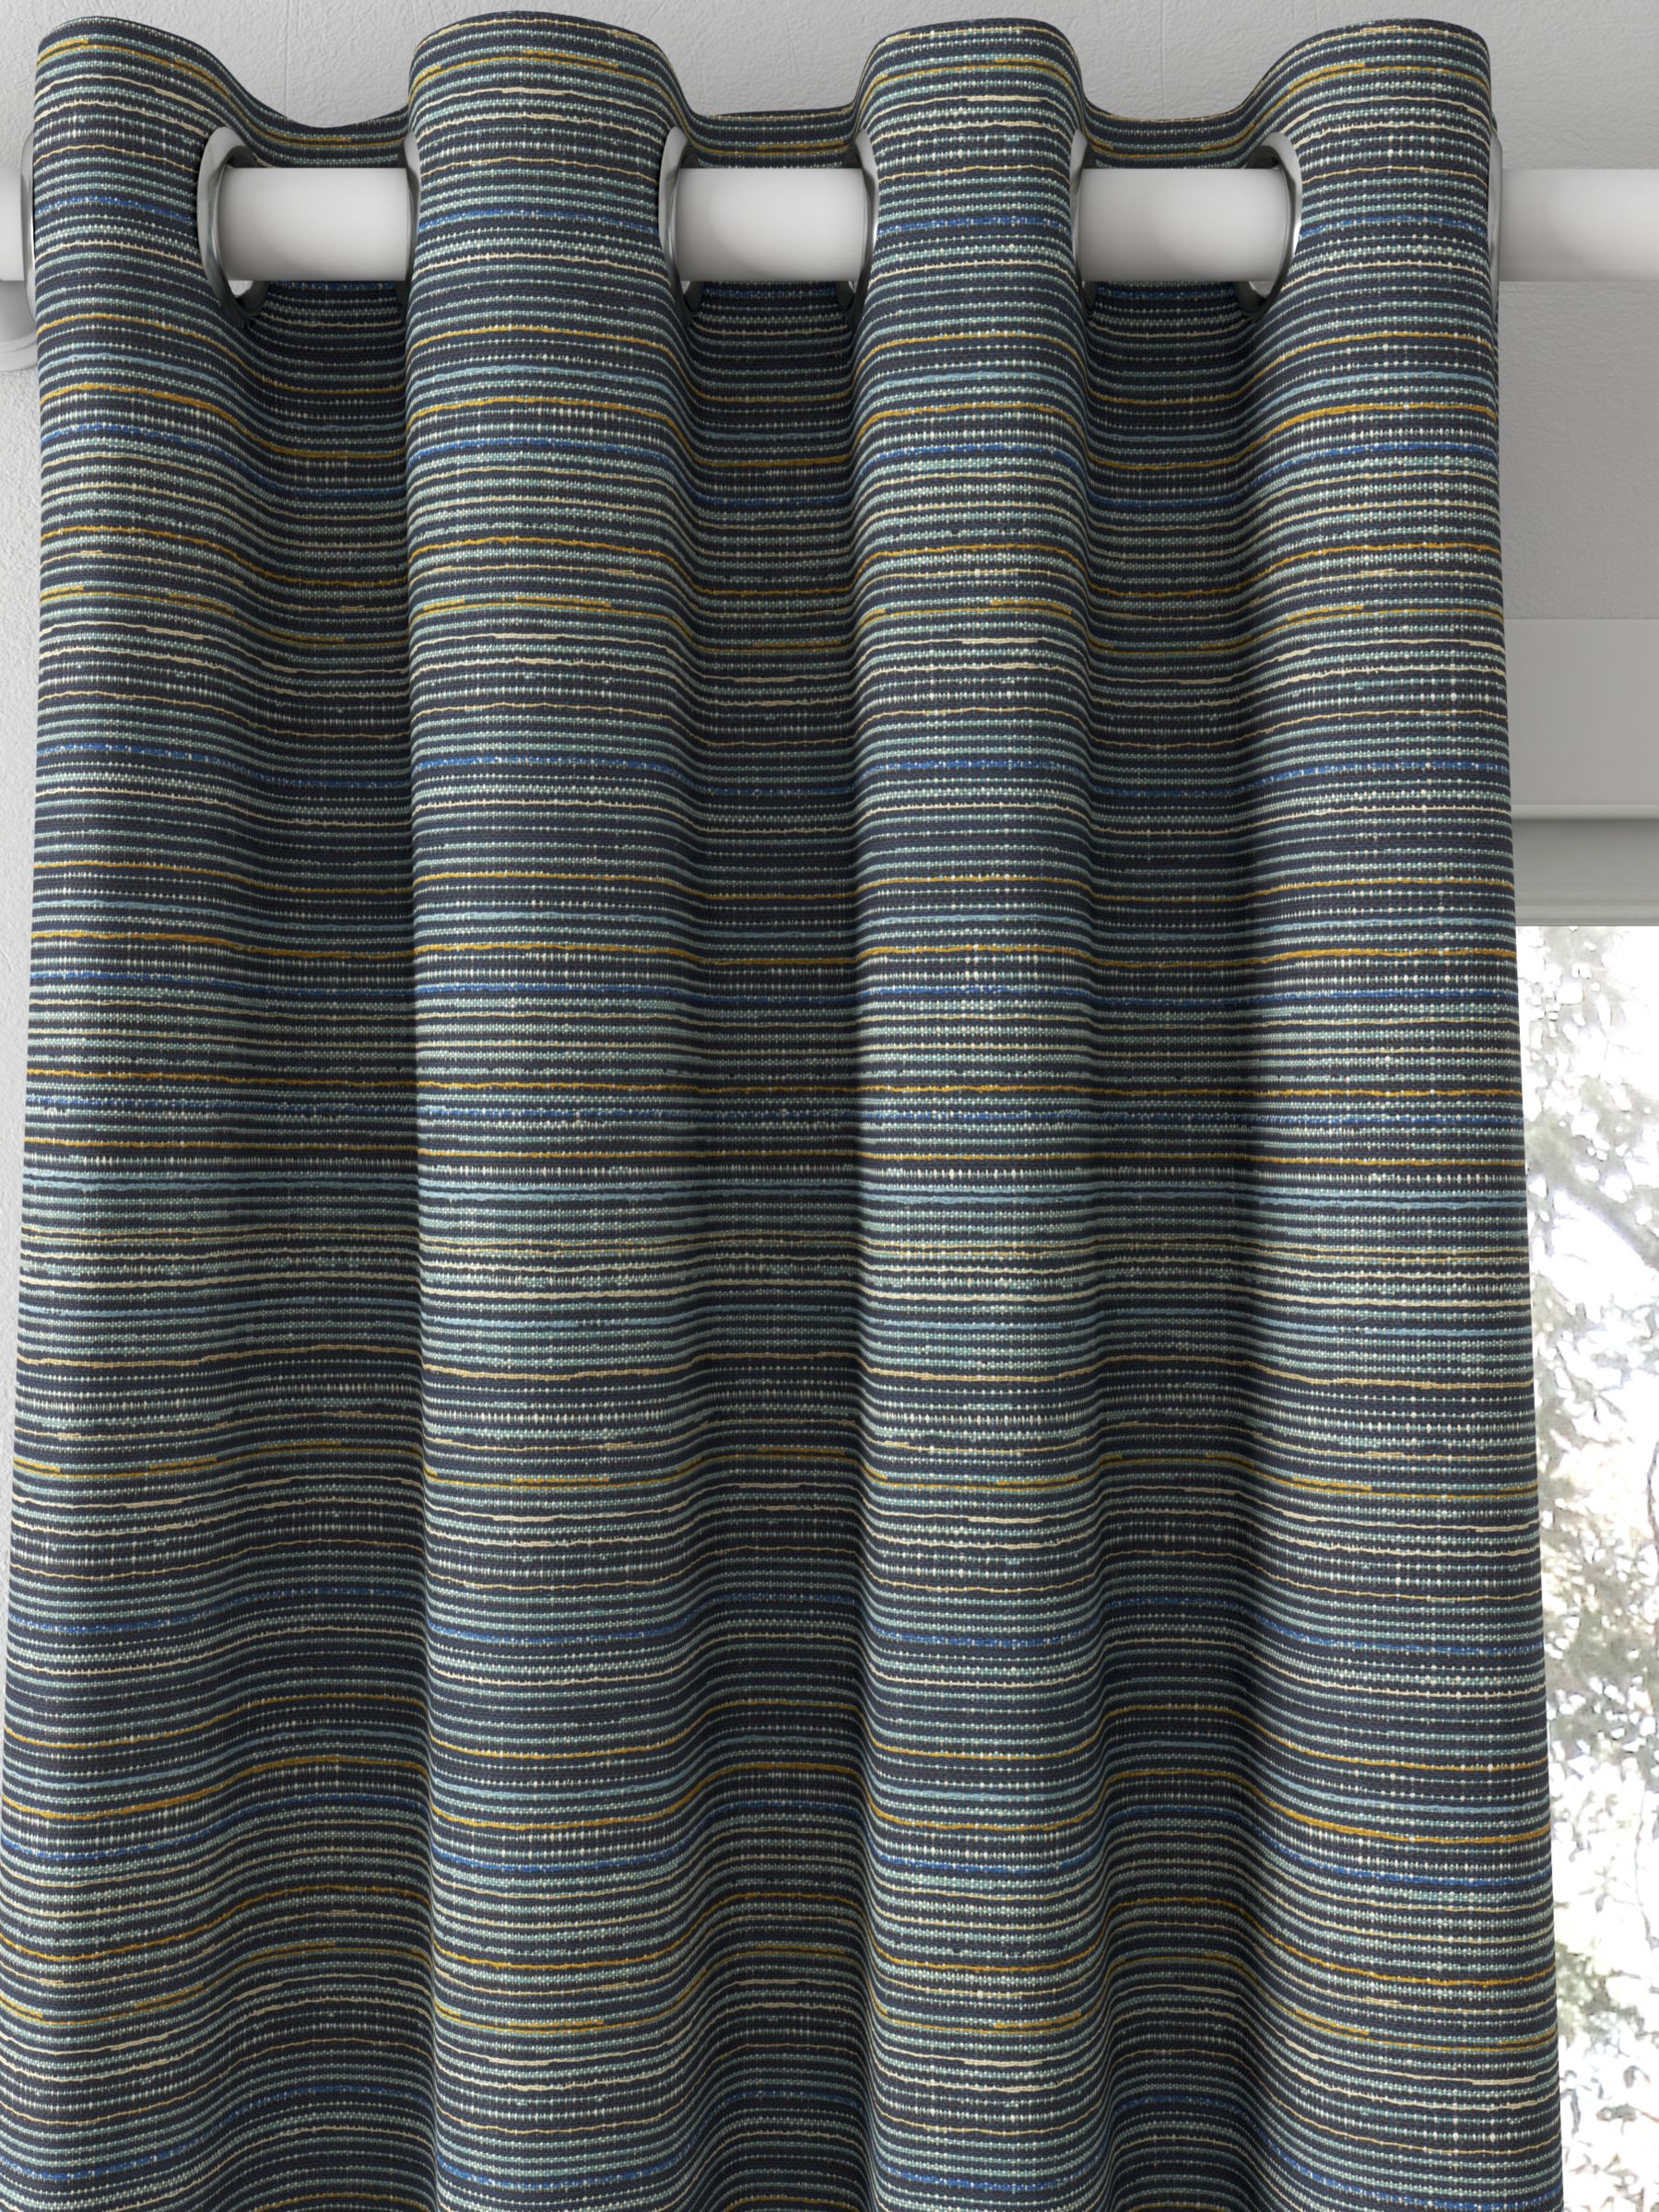 Harlequin Nuka Made to Measure Curtains, Ochre